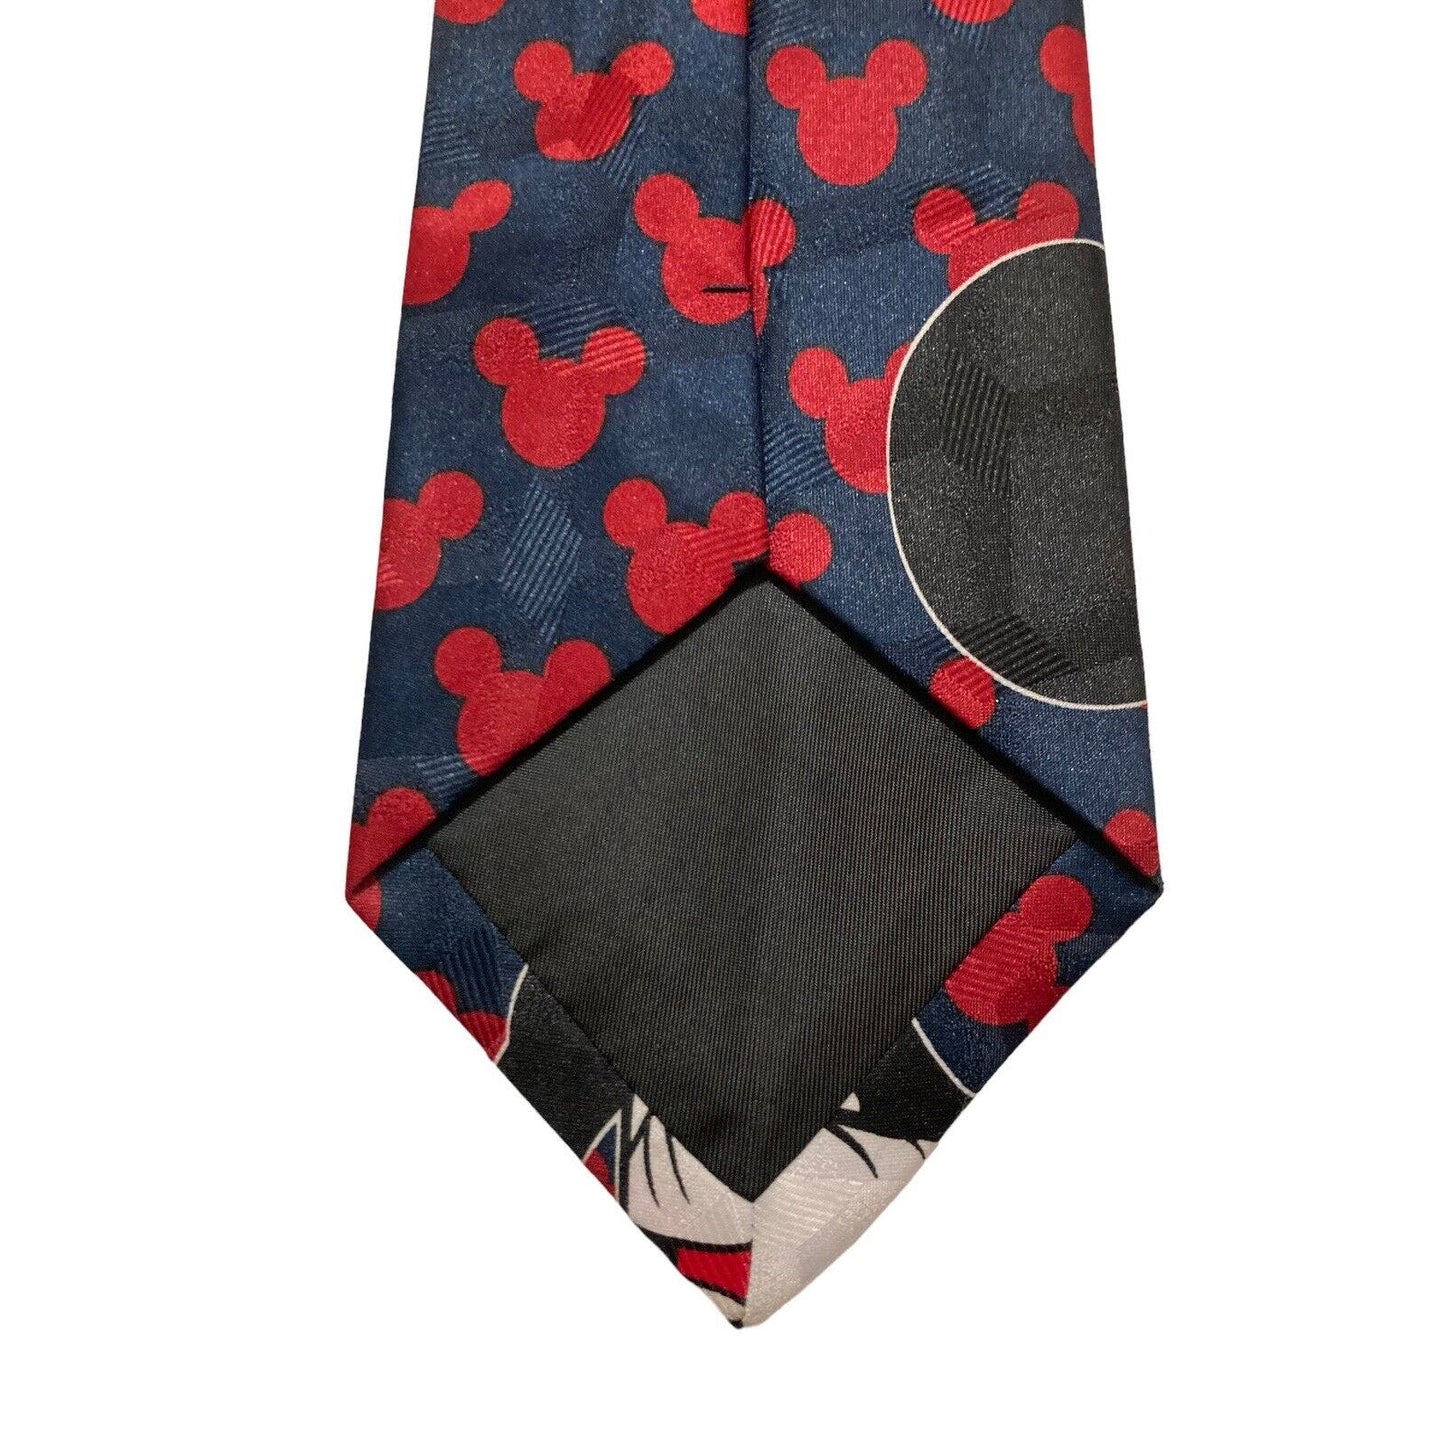 Disney Mickey Unlimited Mickey Mouse Large And In Charge Polka Dots Necktie